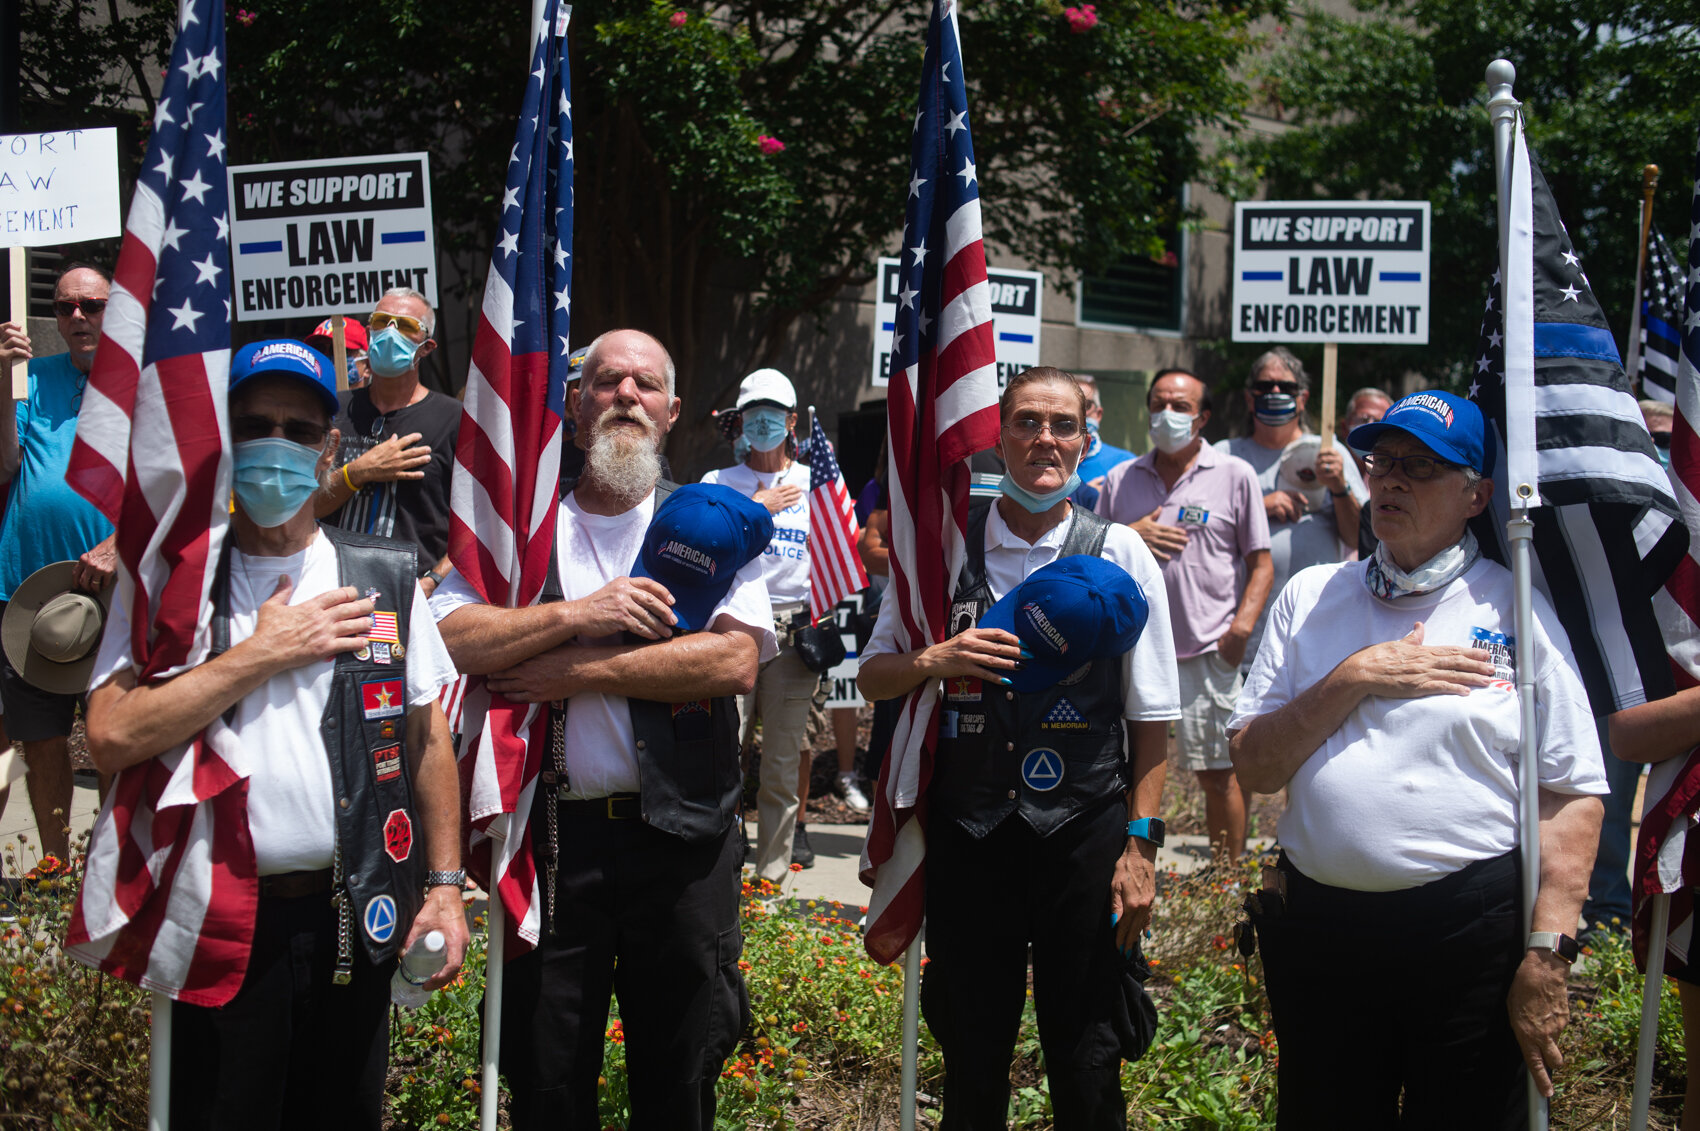  Members of the American Honor Guards of North Carolina, a veteran group, say the pledge of allegiance during a ‘Back the Blue’ protest in July 2020. (Port City Daily photo/Mark Darrough) 